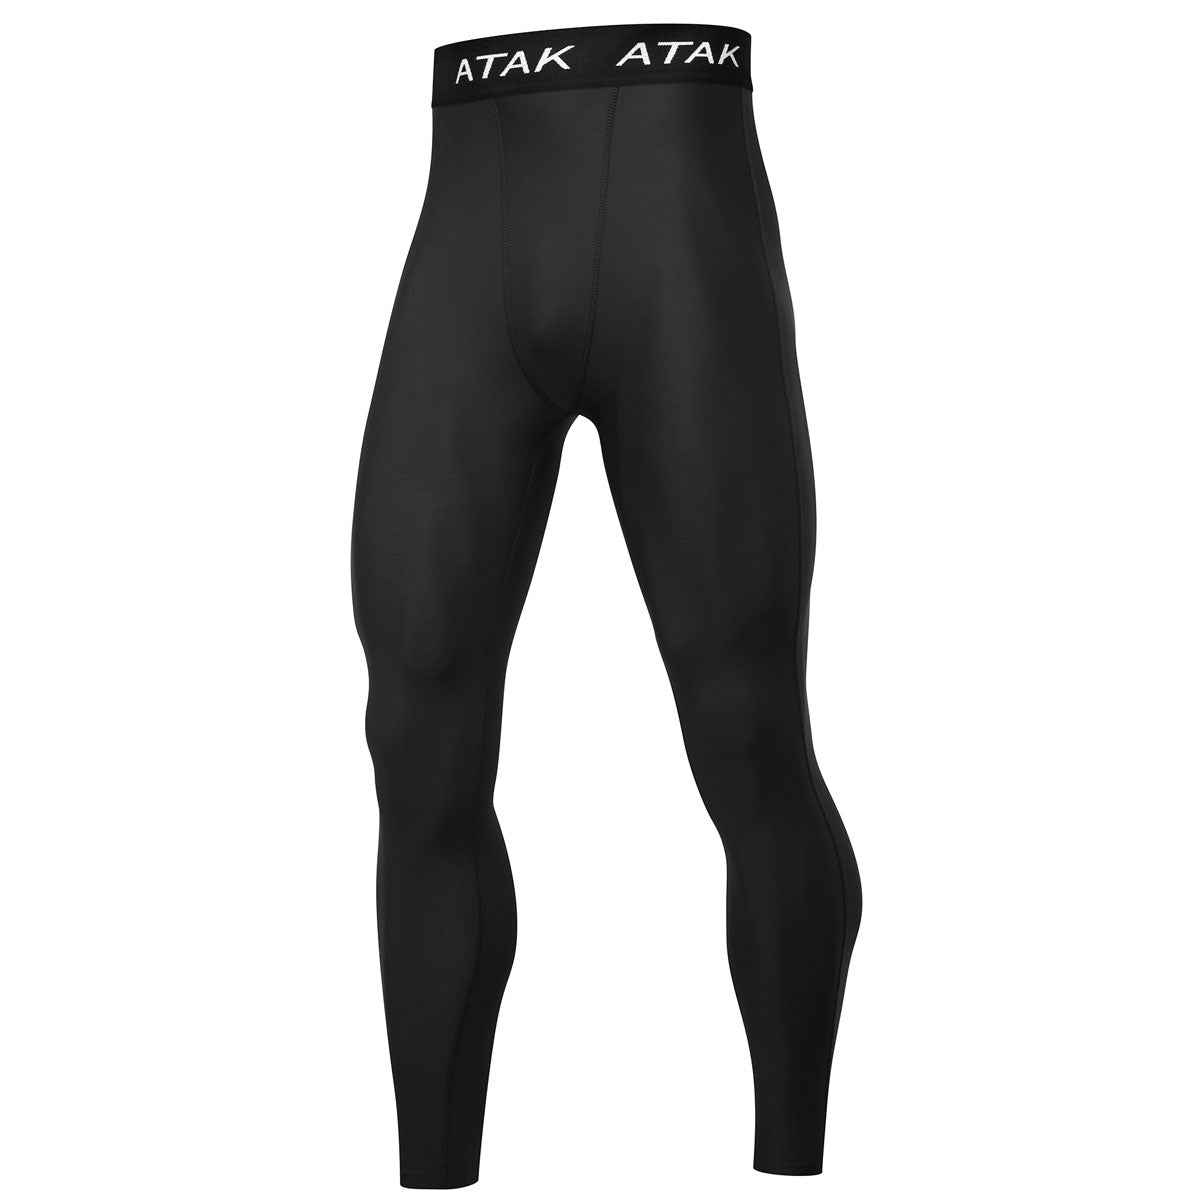 Atak Compression Recovery Tights - Adult - Black